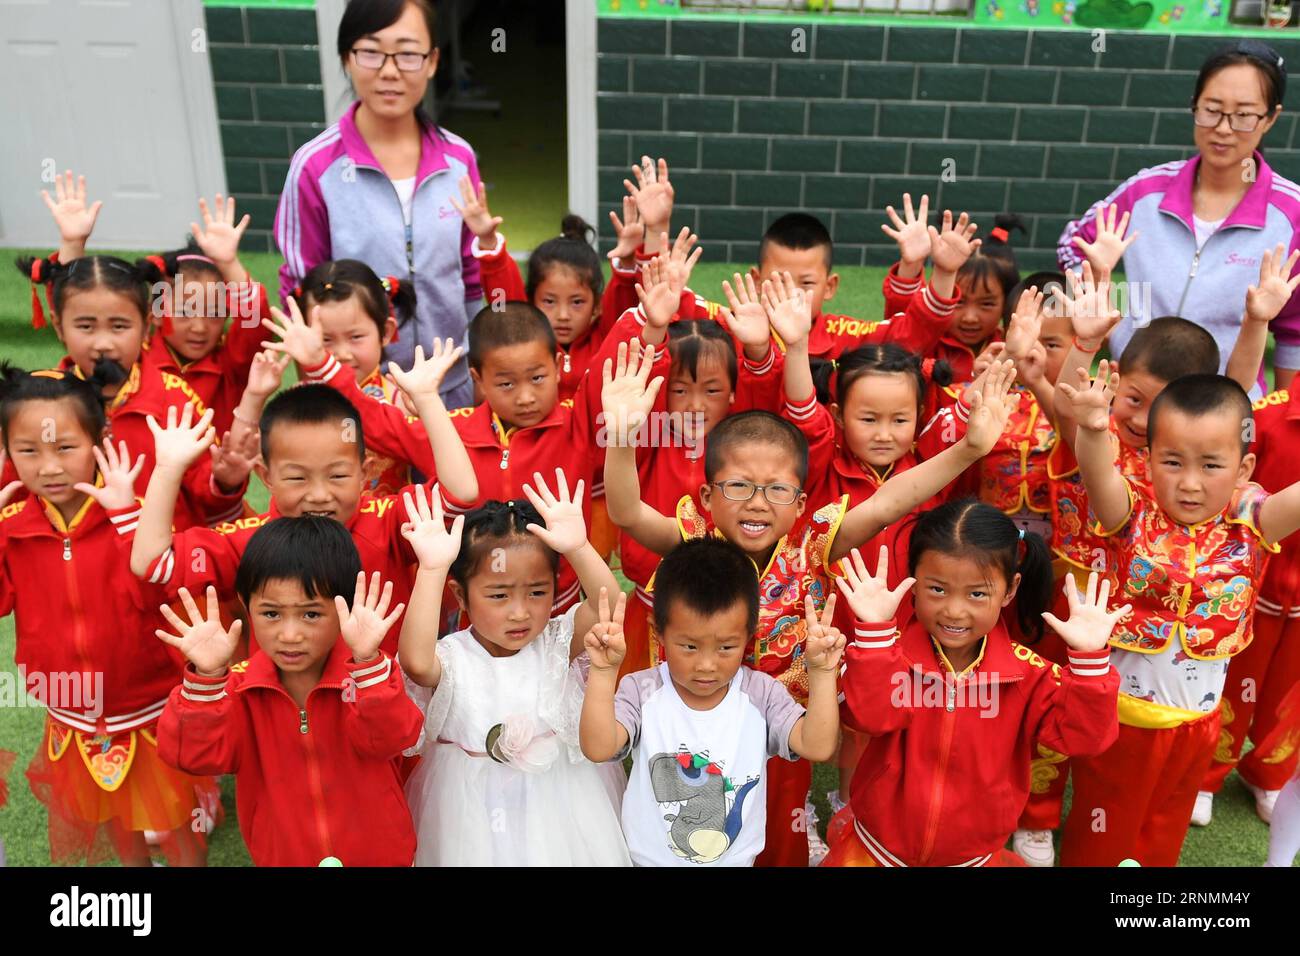 (170603) -- HUACHI, June 3, 2017 -- Children show their clean hands after washing hands at a kindergarten in Xinbao Village of Huachi County, northwest China s Gansu Province, June 3, 2017. To improve the hygiene education in remote areas, China Develpment Research Foundation and Unilever carried out a project to promote hand wash among children in classes. The project so far has covered more than 10,000 rural children in serveral provinces of China. ) (ry) CHINA-GANSU-HUACHI-RURAL KINDERGARTEN-EDUCATION (CN) ChenxBin PUBLICATIONxNOTxINxCHN   Huachi June 3 2017 Children Show their Clean Hands Stock Photo